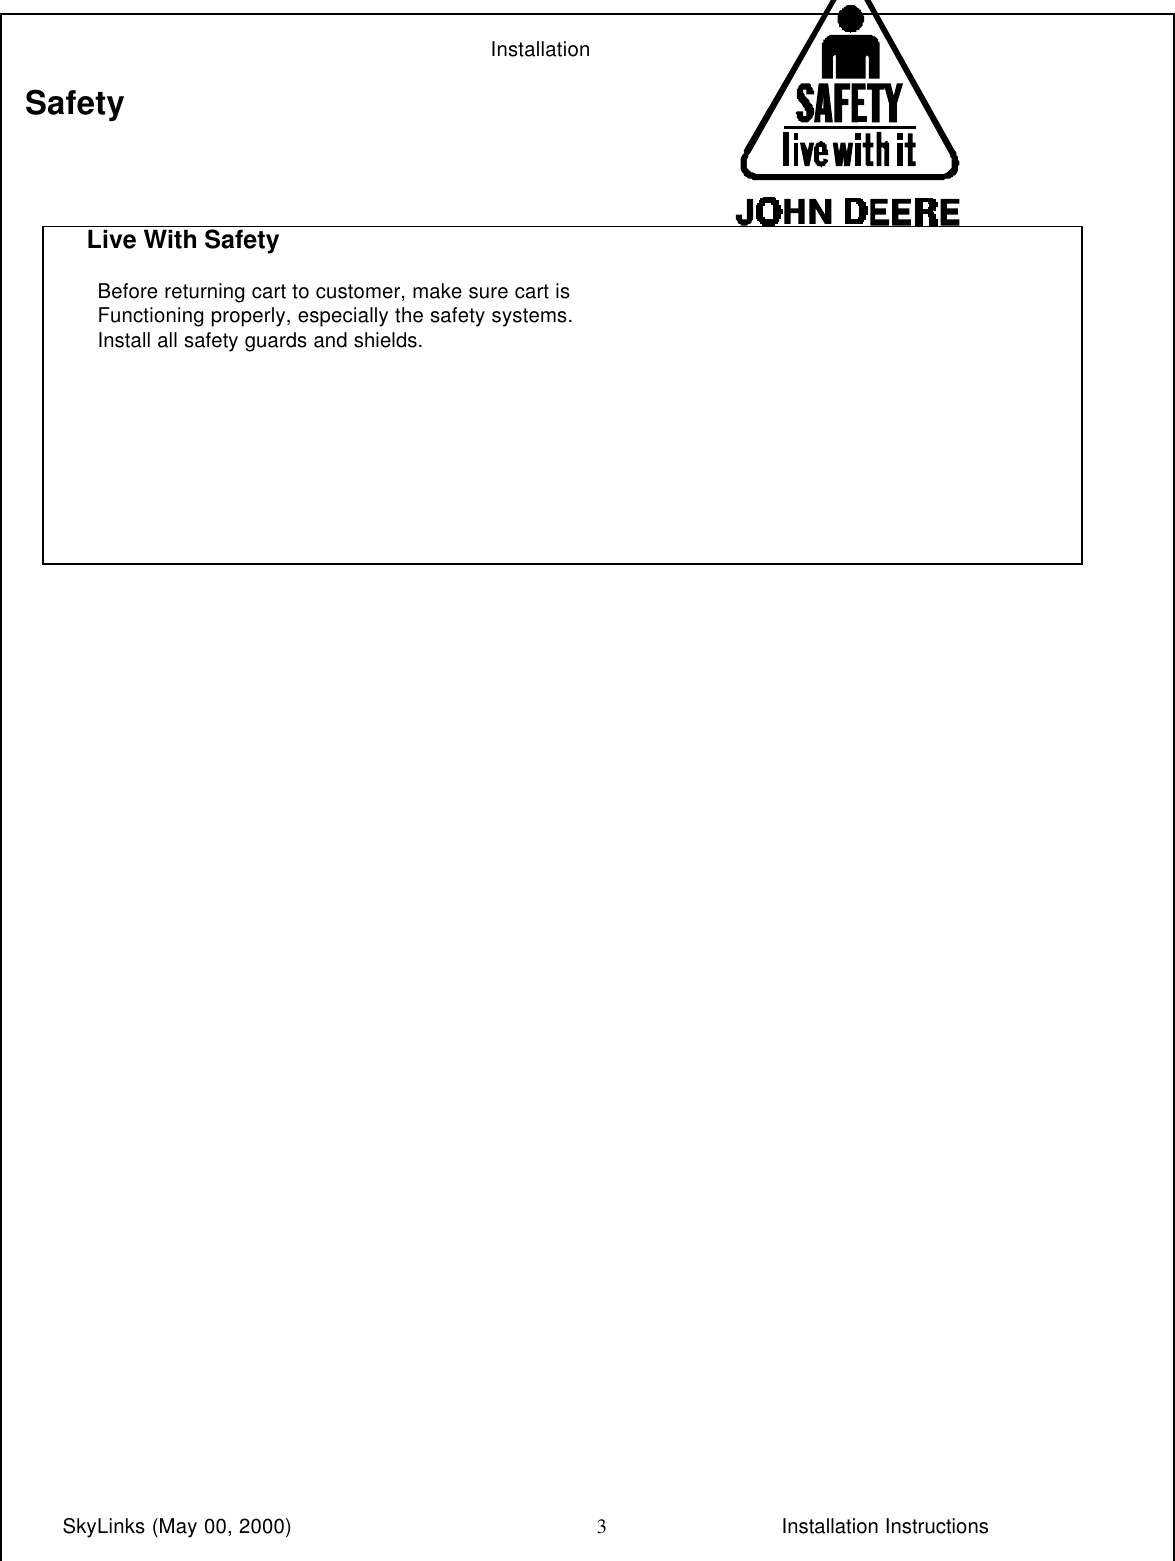 InstallationSkyLinks (May 00, 2000)                        Installation Instructions3Safety      Live With Safety       Before returning cart to customer, make sure cart is       Functioning properly, especially the safety systems.       Install all safety guards and shields.